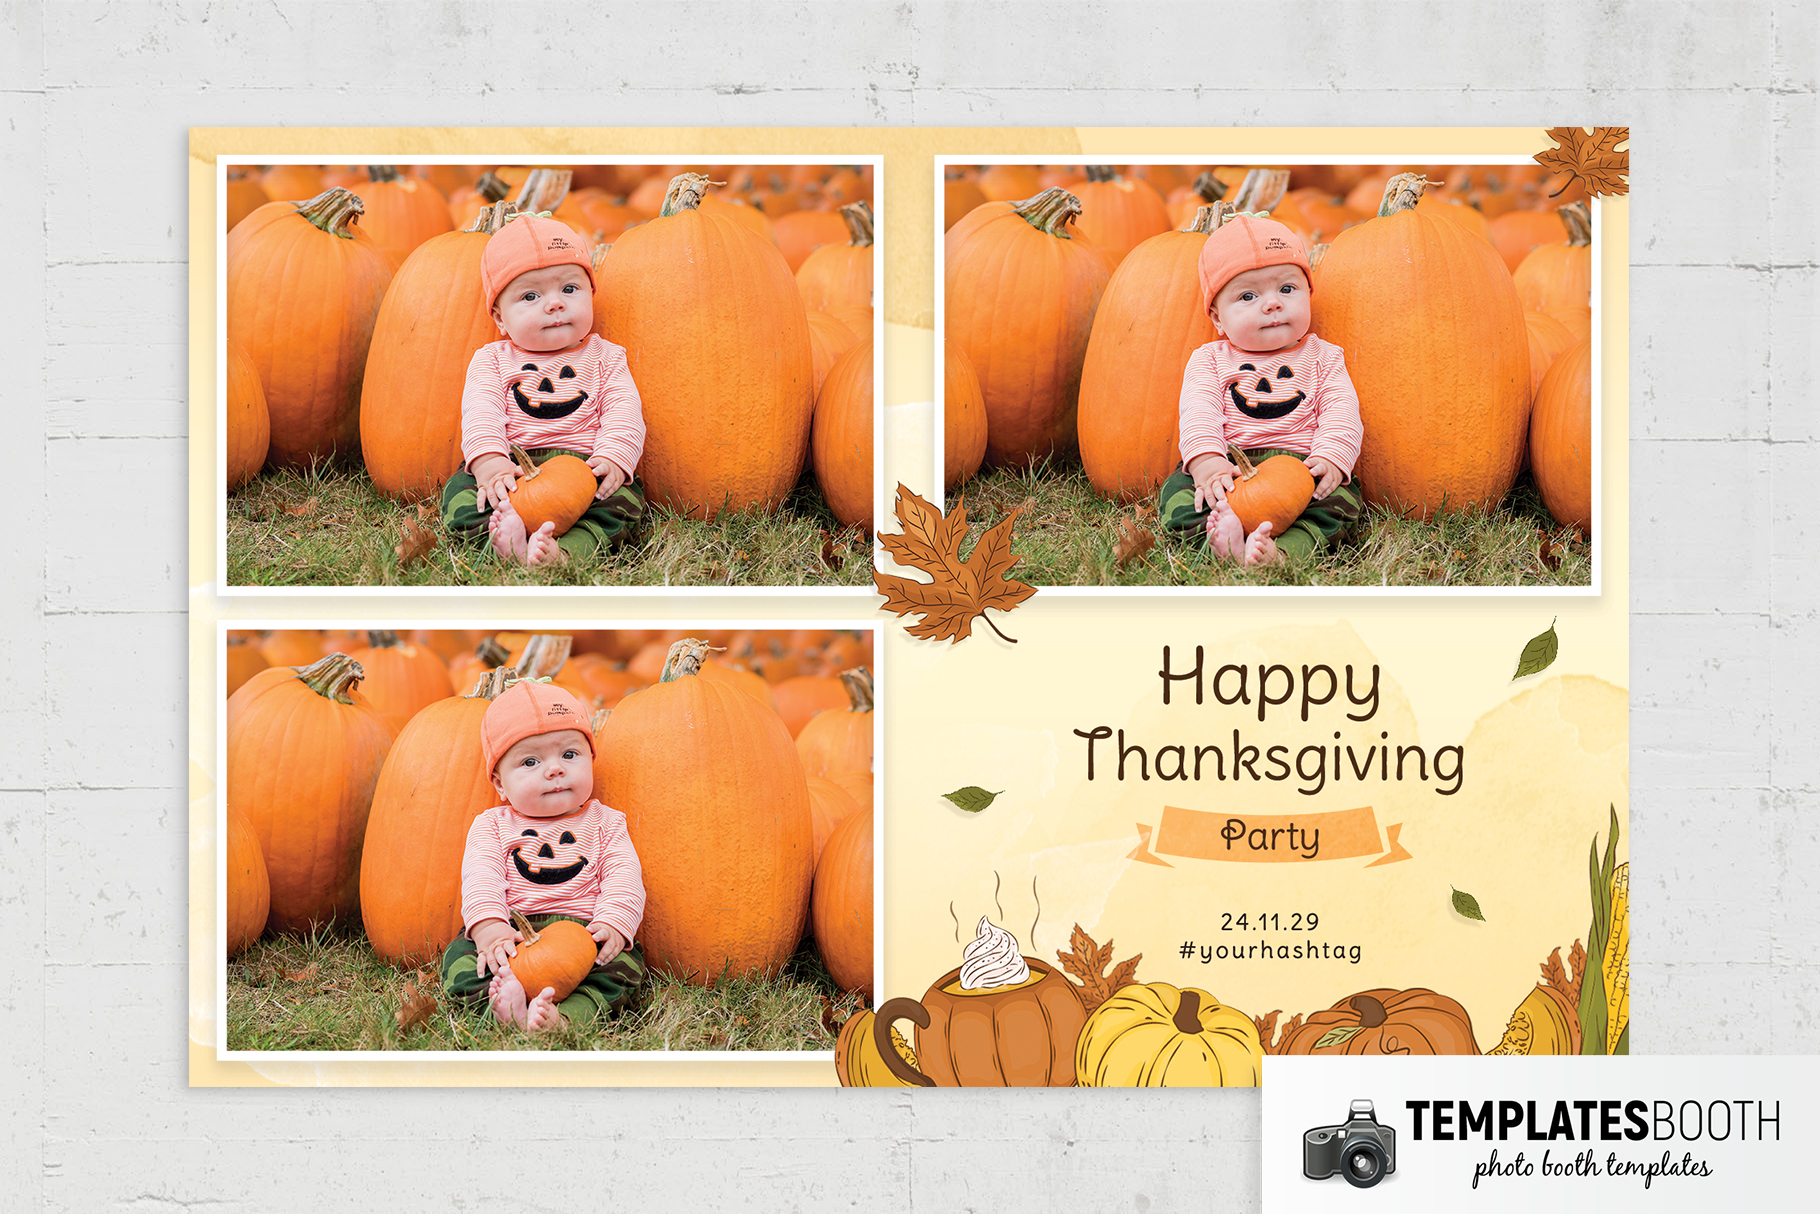 Thanksgiving Photo Booth Template (PSD Format)